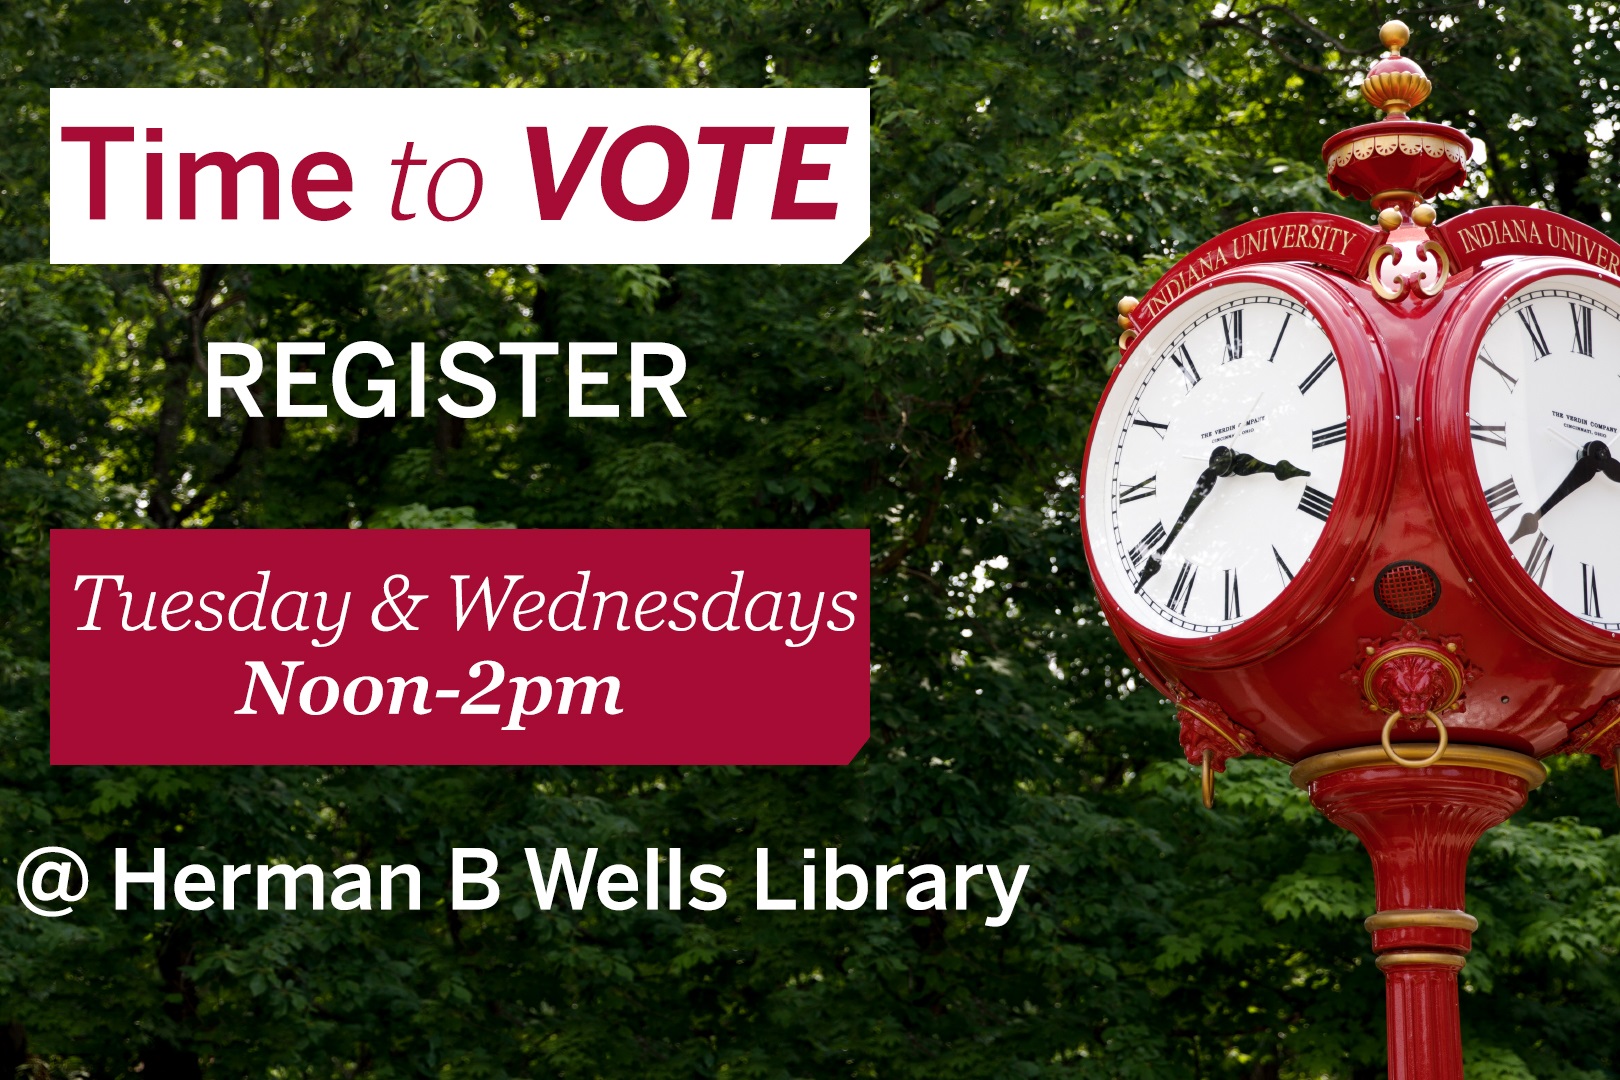 Time to Vote! Register Tuesday & Wednesdays noon-2pm, @ Herman B Wells Library